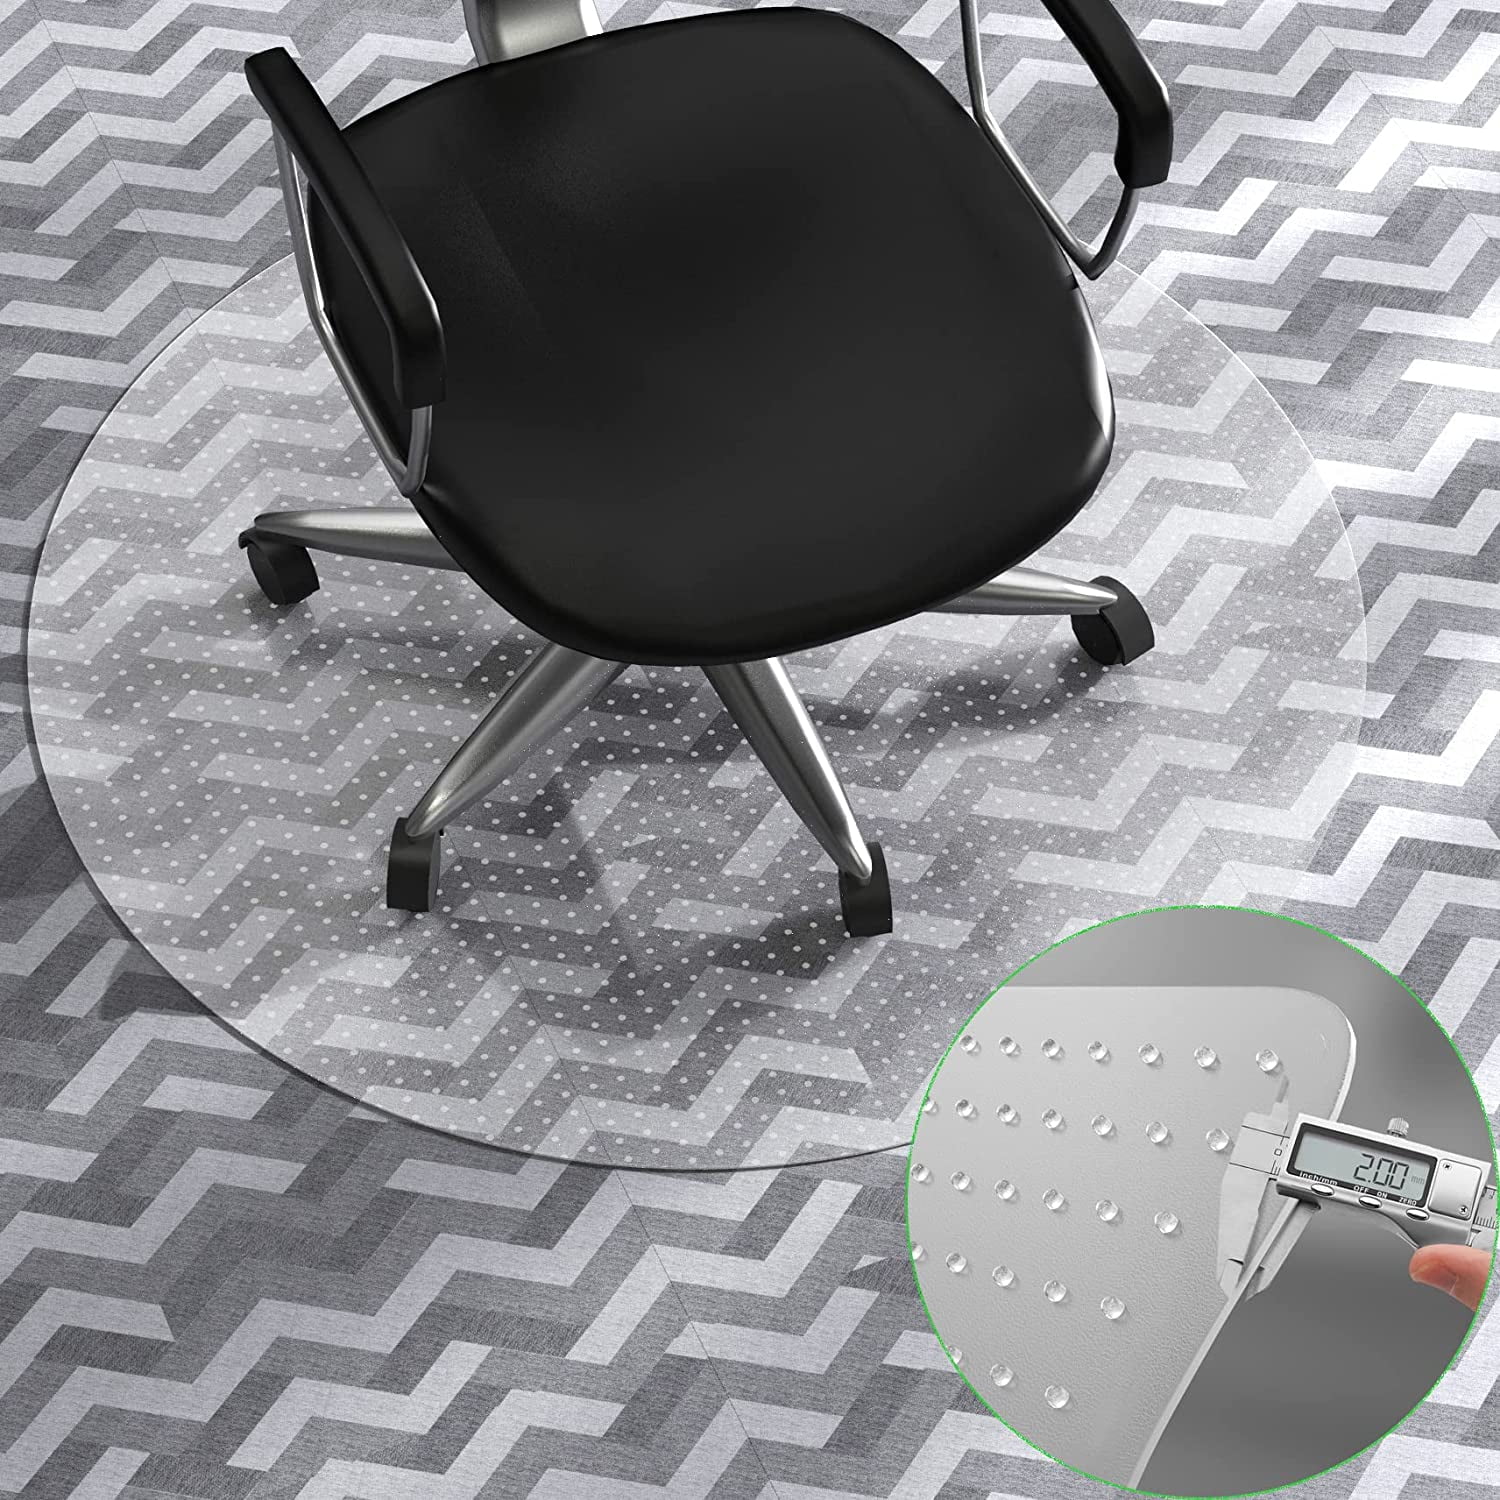 Copedvic Office Chair Mat for Carpeted Floors, 36 inch Round 3.0mm Thick, Floor Mats with Studs for Low and Medium Pile Carpets for Under Chairs, Clear